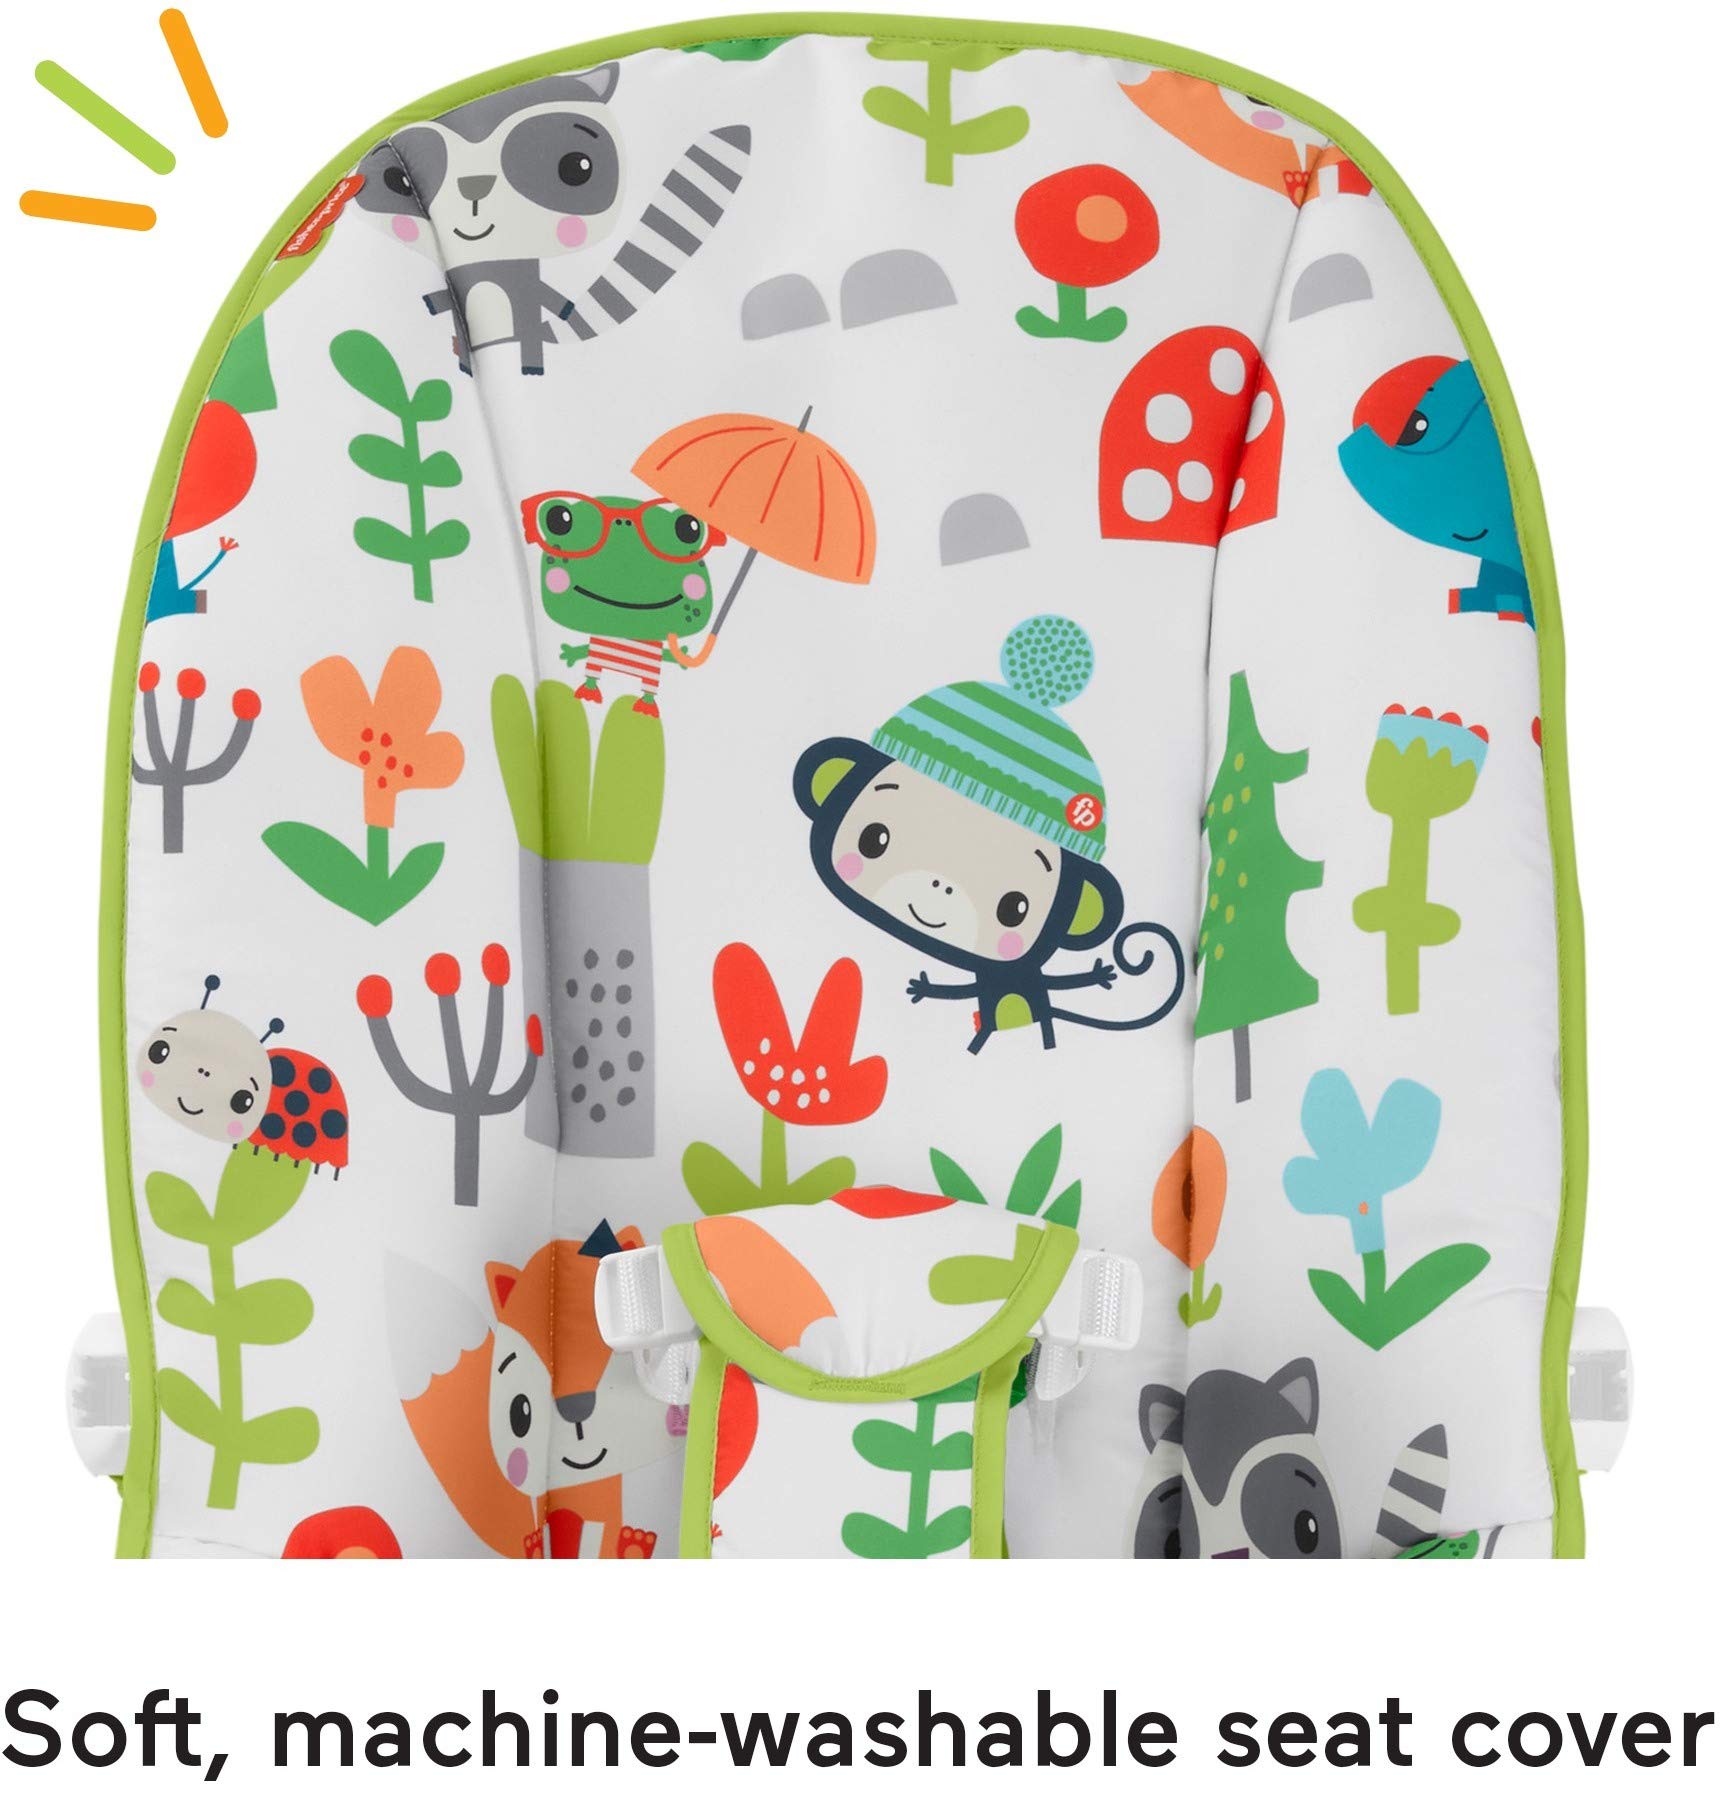 Fisher-Price Baby's Bouncer – Green, bouncing seat for soothing and play for newborns and infants [Amazon Exclusive]